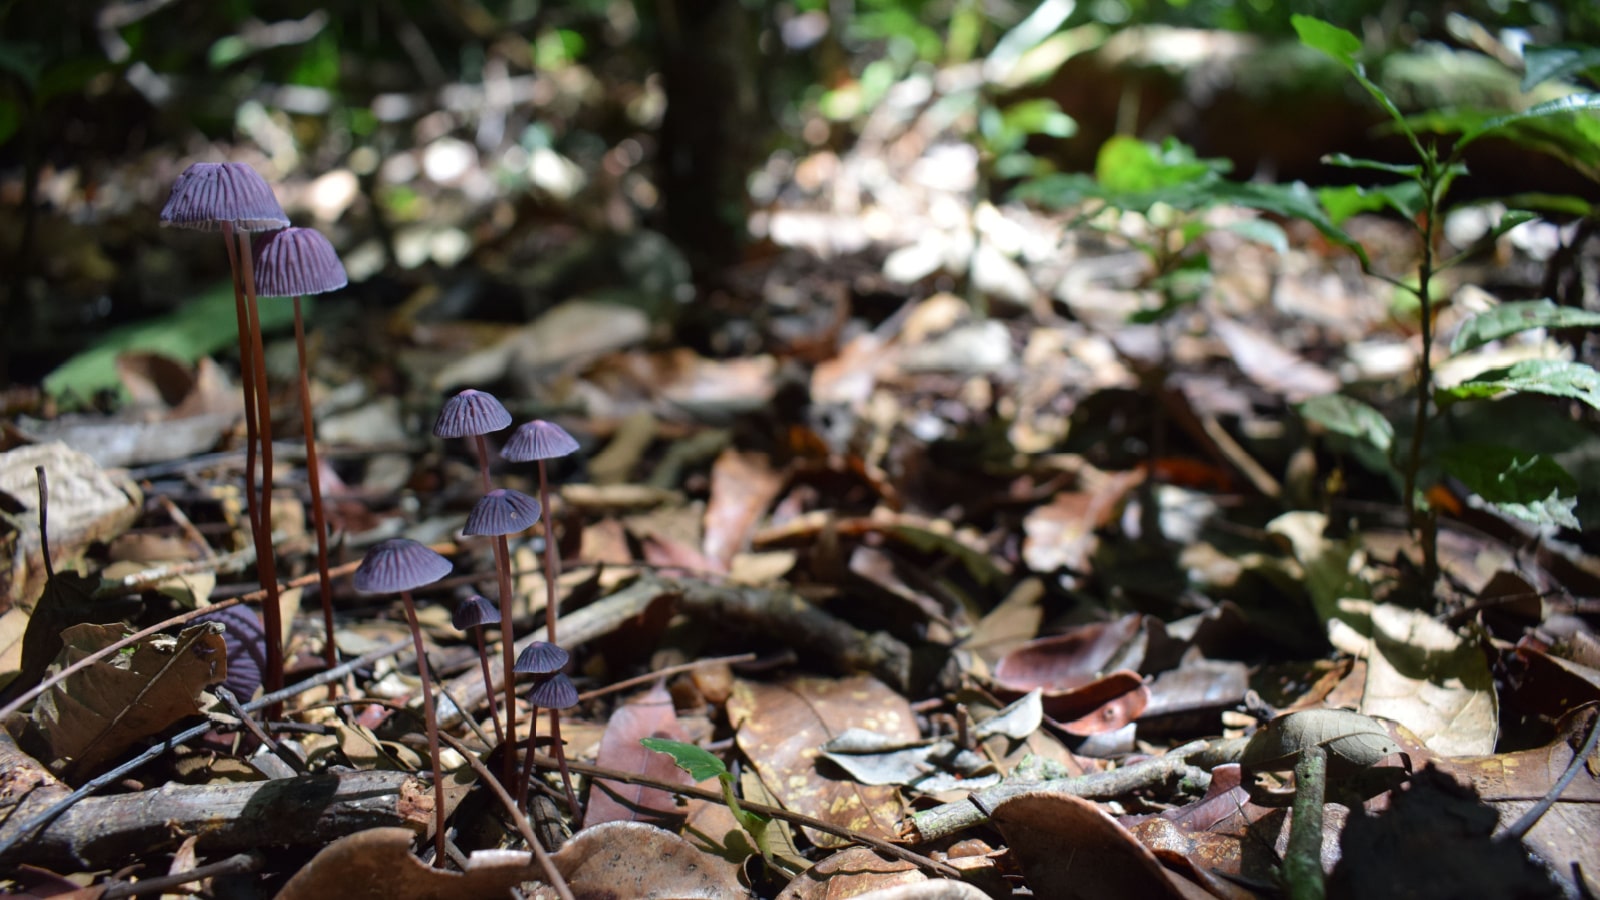 Group of purple mushrooms in the tropical rainforest of the Taï National Park in the Ivory Coast